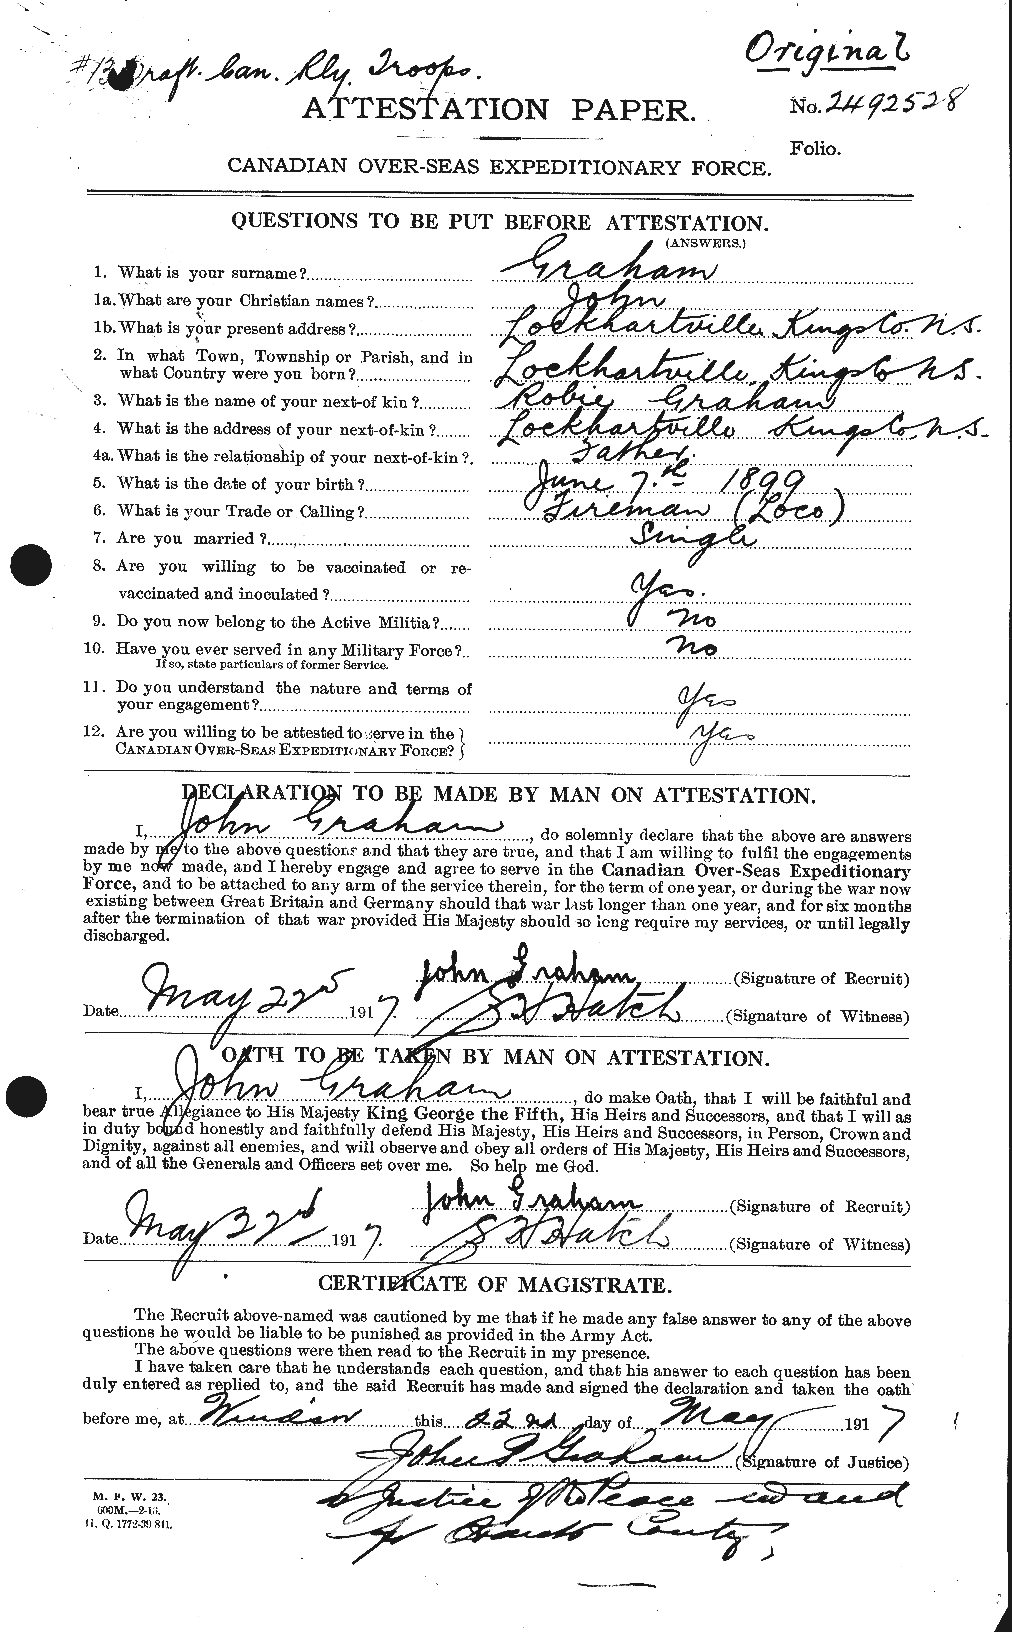 Personnel Records of the First World War - CEF 359116a